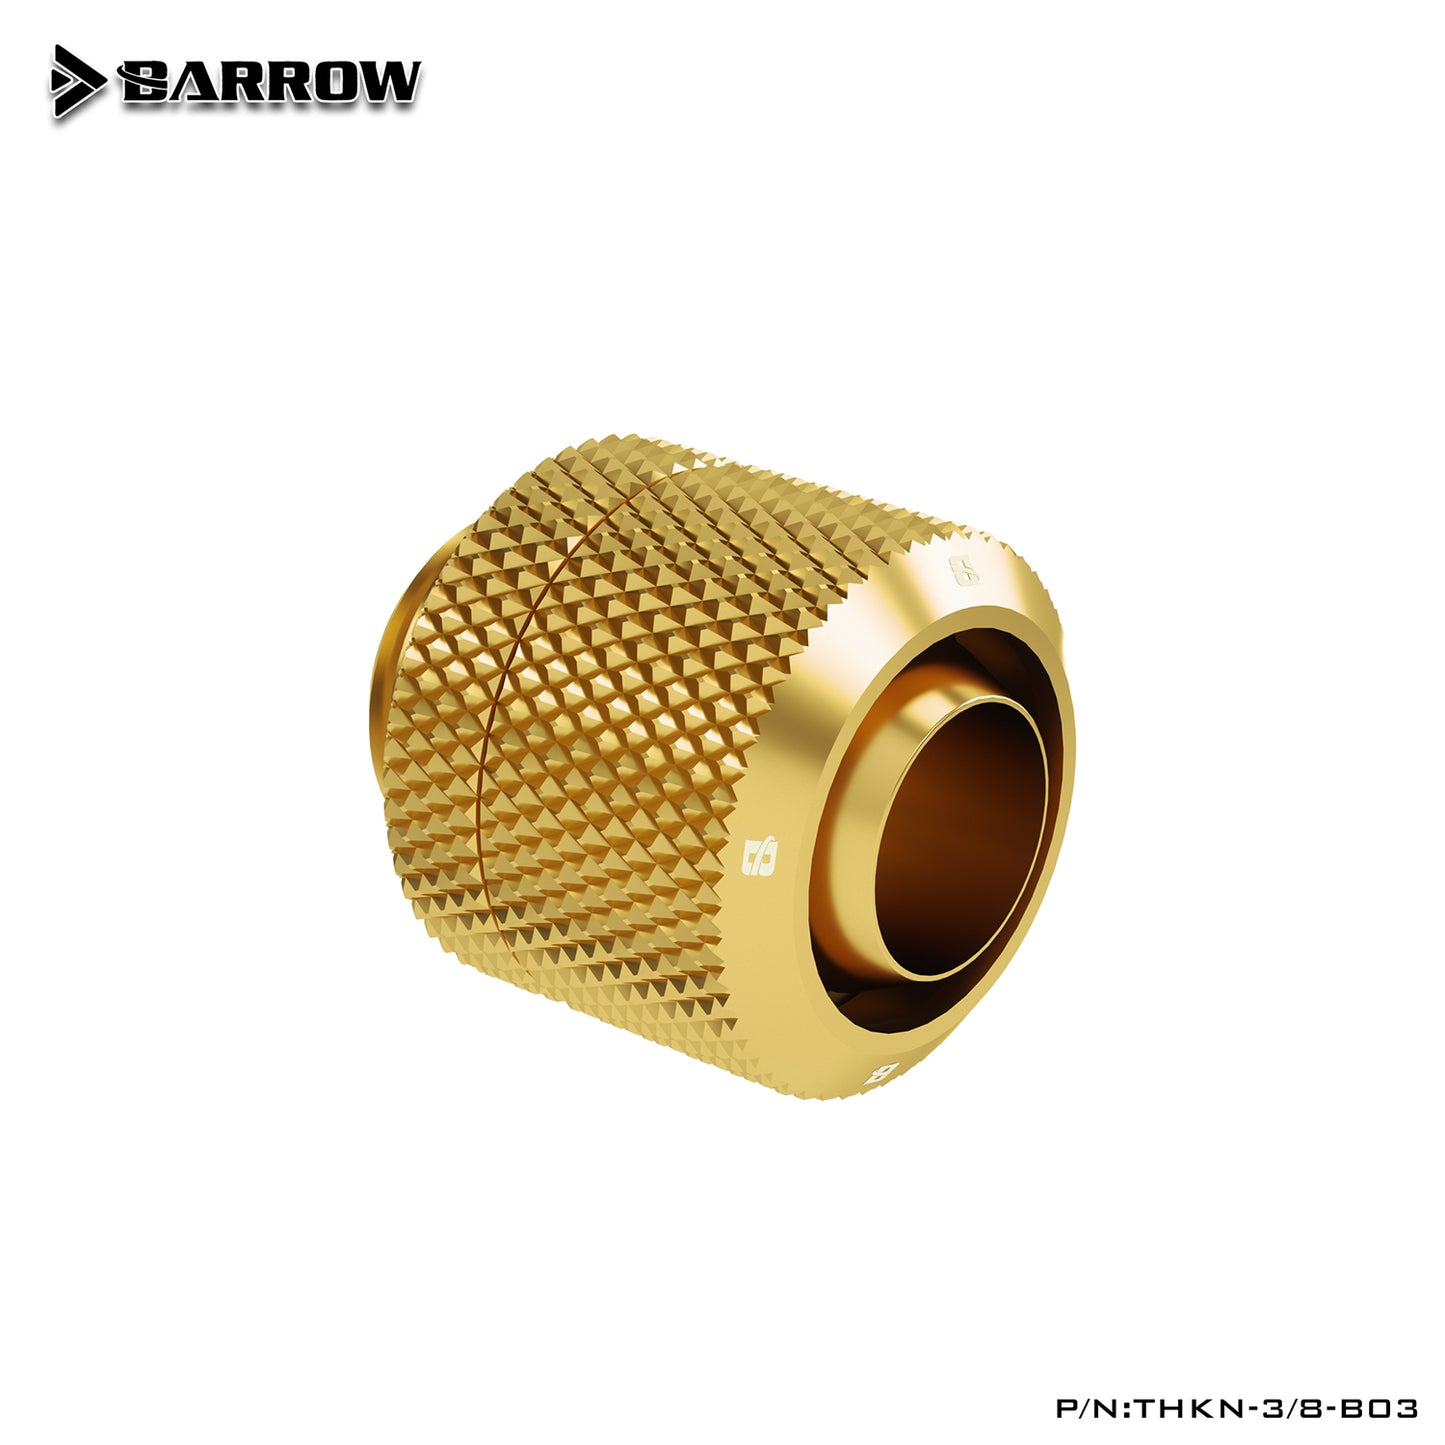 Barrow 10x13mm Soft Tube Fitting, 3/8"ID*1/2"OD G1/4" Compression Connector, Water Cooling Soft Tubing Compression Adapter, THKN-3/8-B03